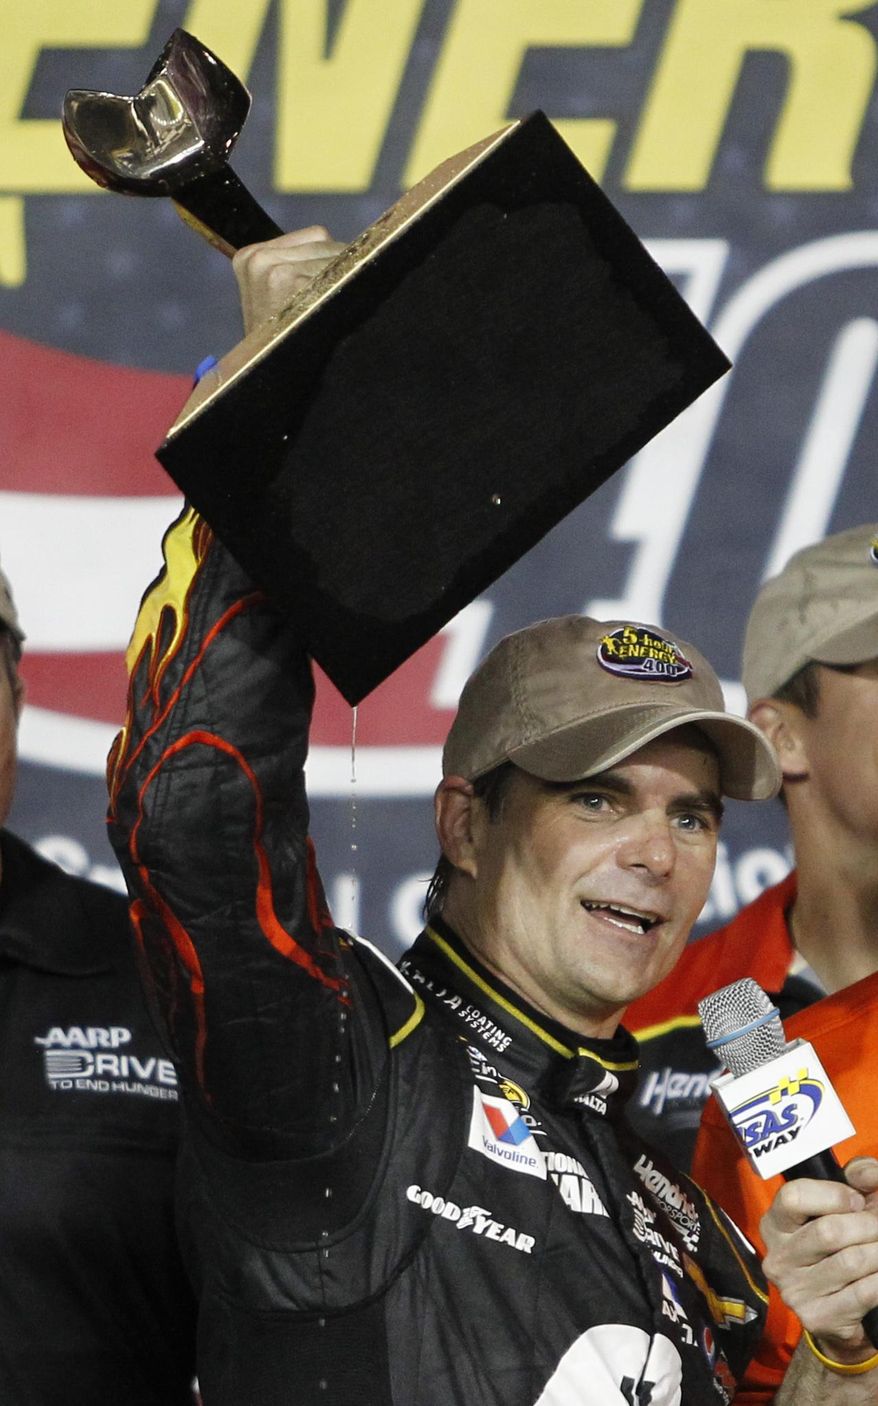 NASCAR driver Jeff Gordon celebrates in victory lane after winning the Sprint Cup Series auto race at Kansas Speedway in Kansas City, Kan., Saturday, May 10, 2014. (AP Photo/Colin E. Braley)